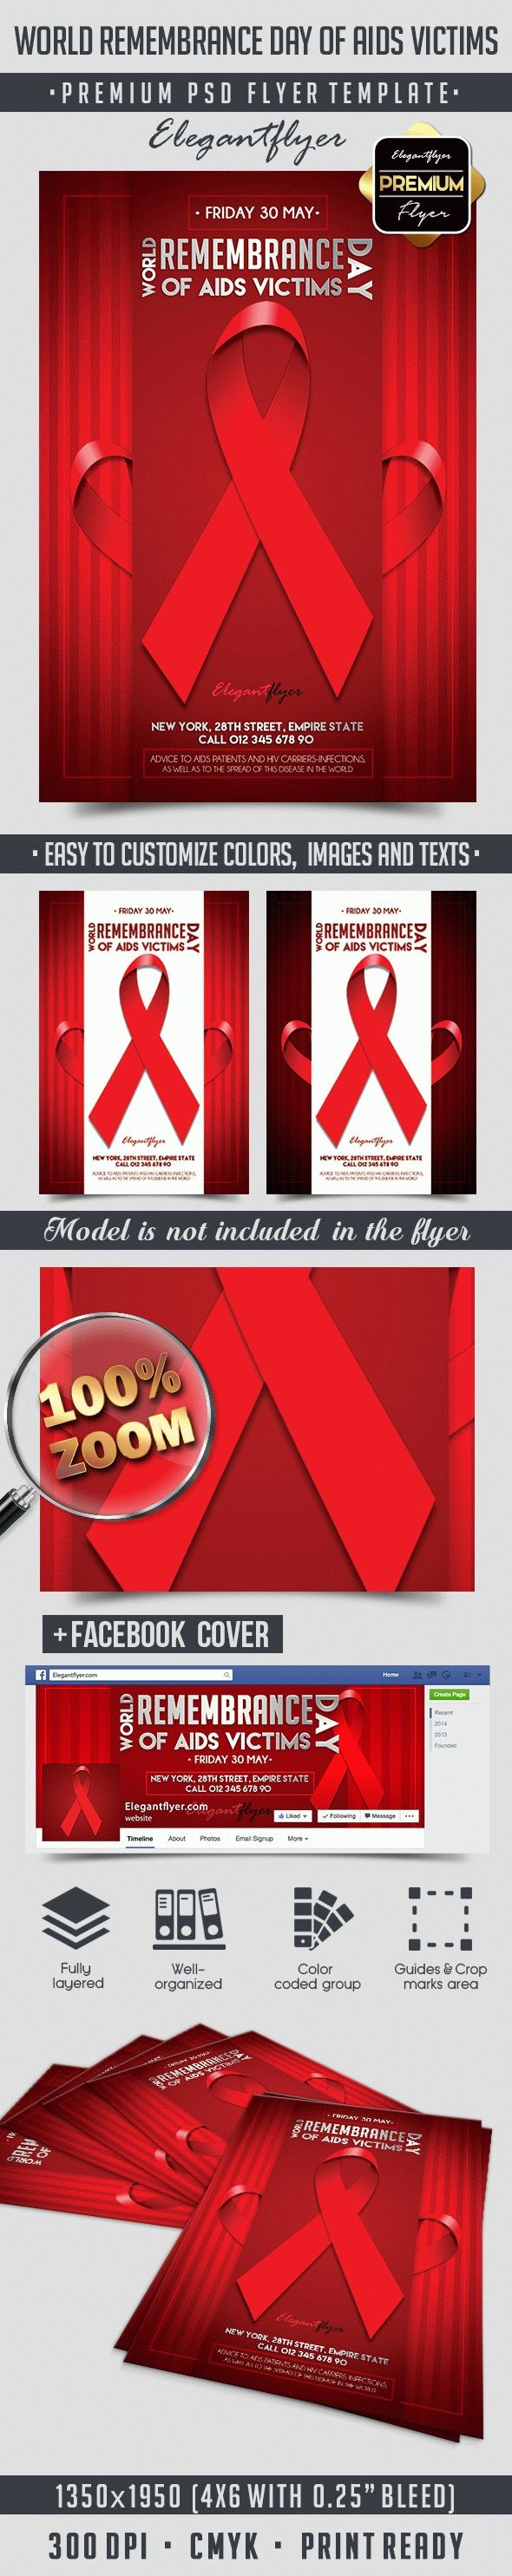 World Remembrance Day of AIDS Victims by ElegantFlyer